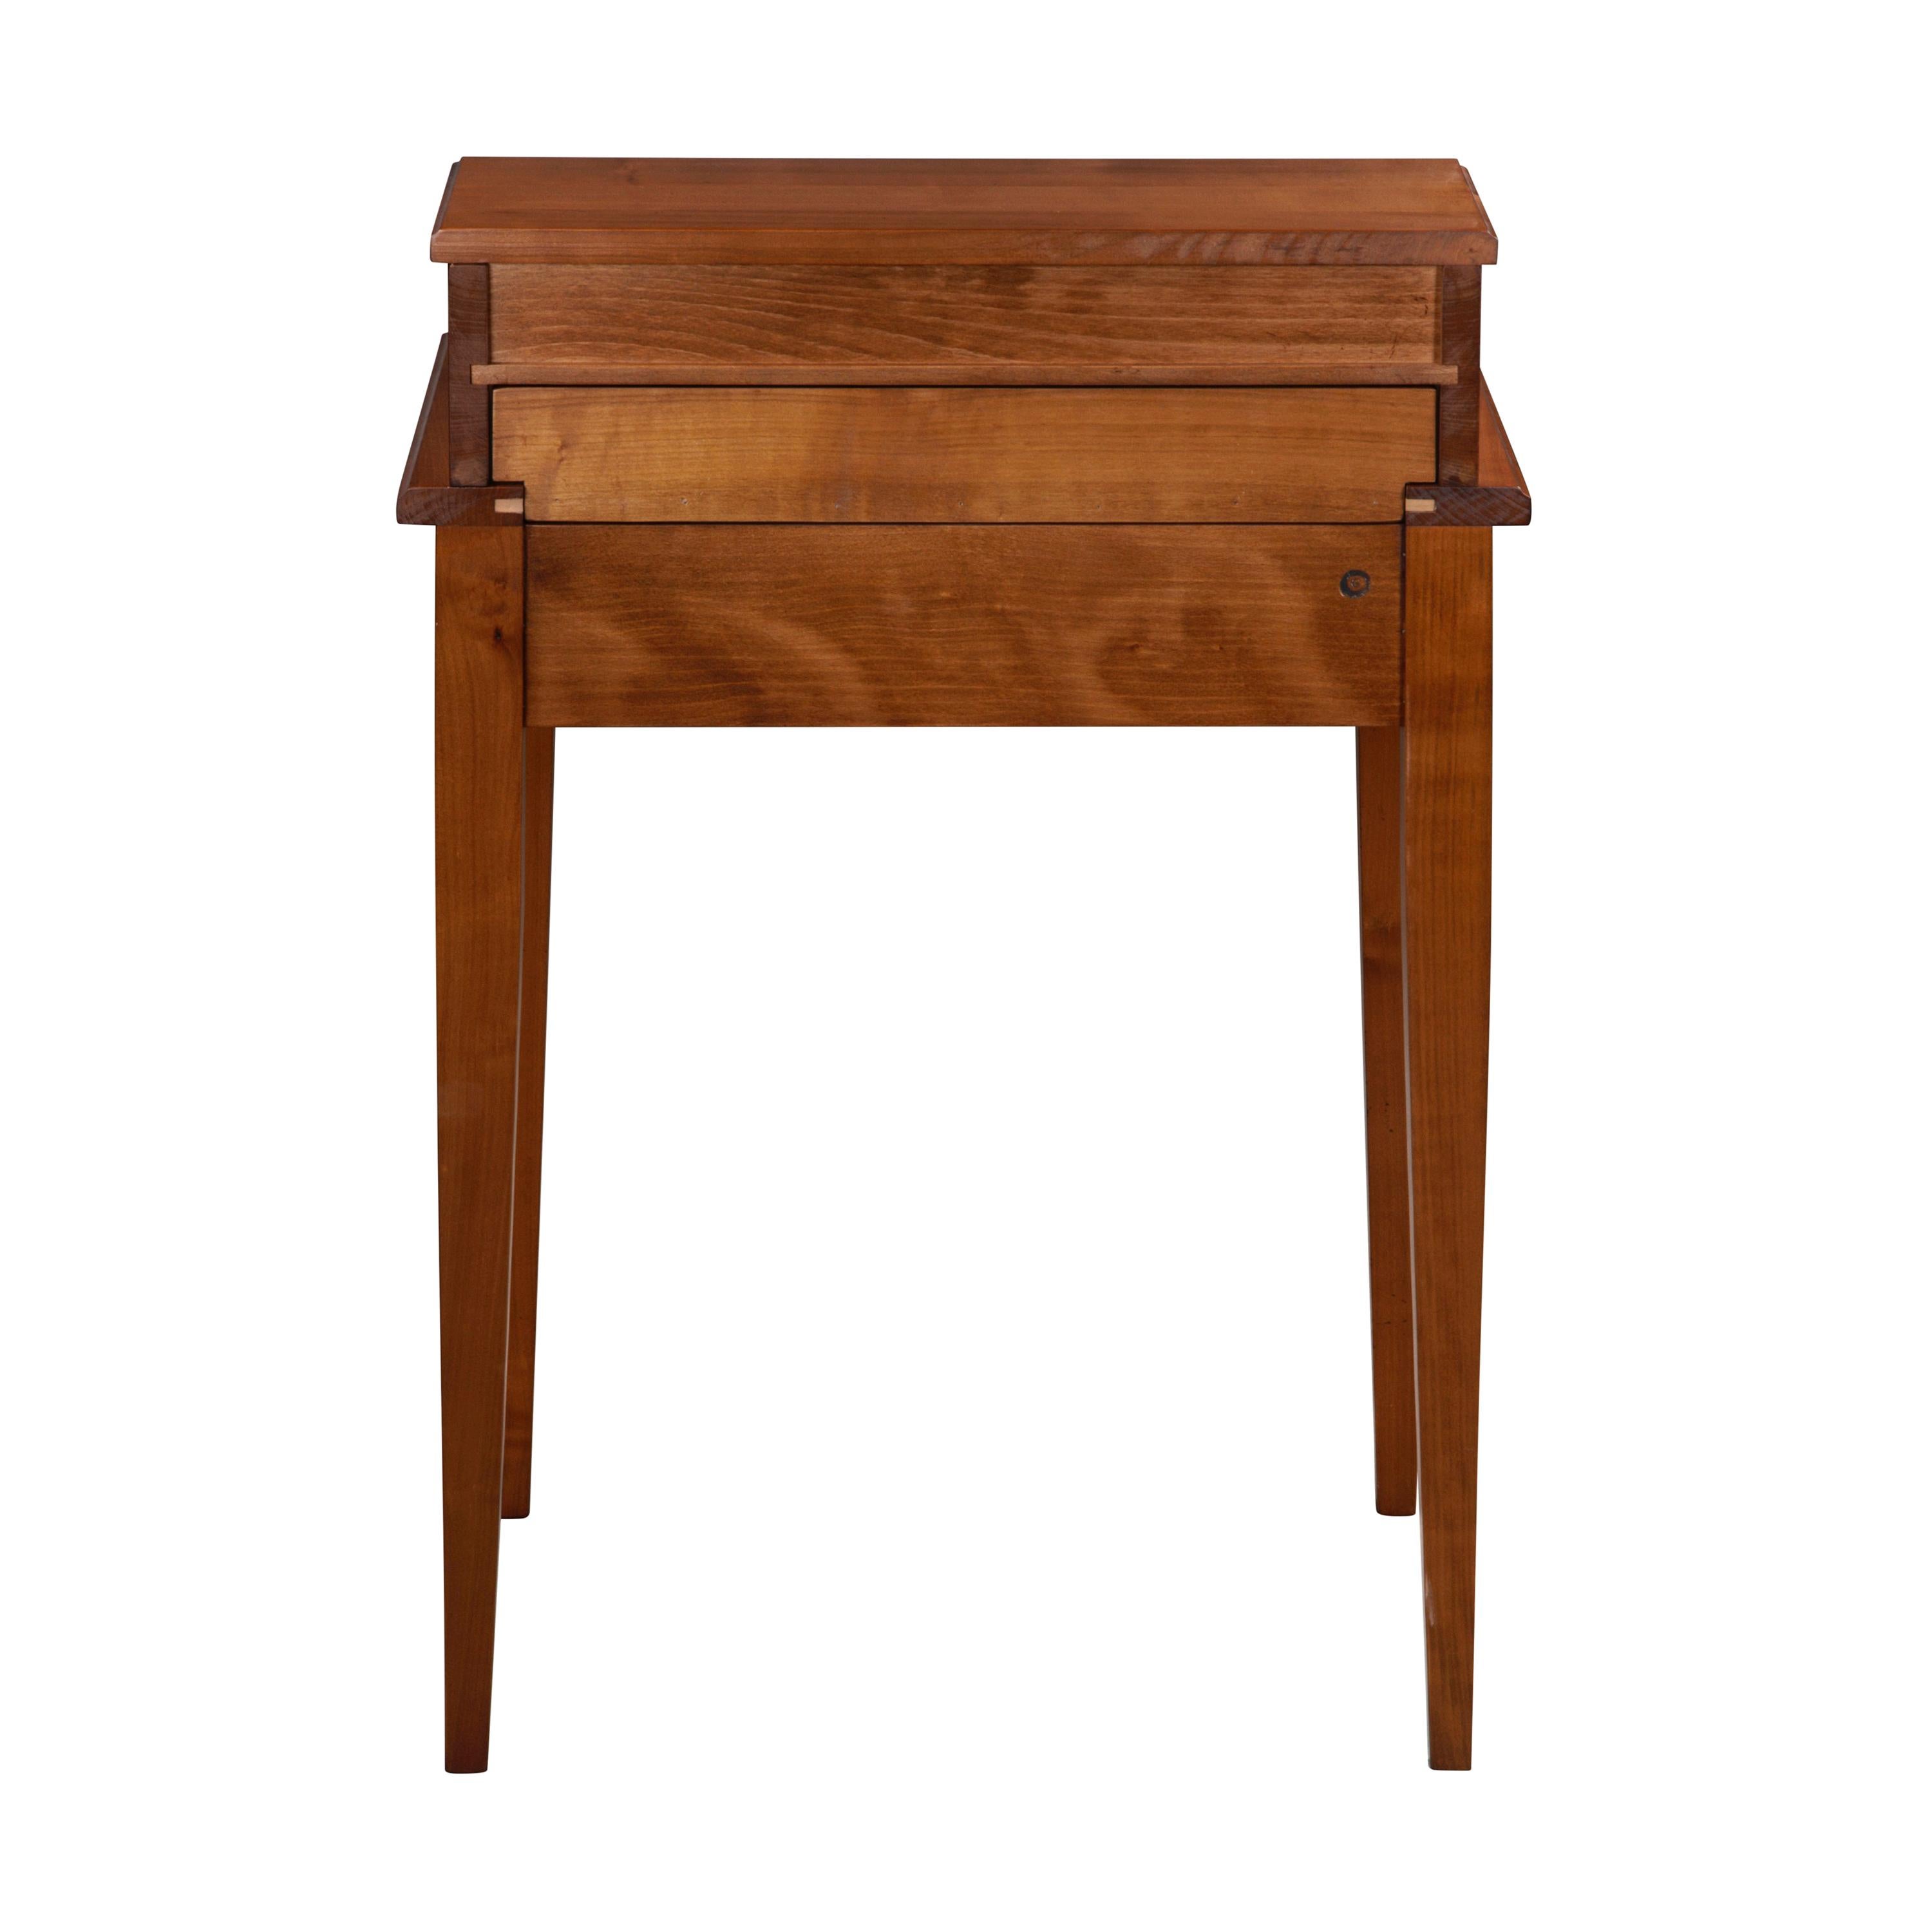 Contemporary Directoire Style Desk Solid Cherry with Leather Pad and Covered Storage Space For Sale